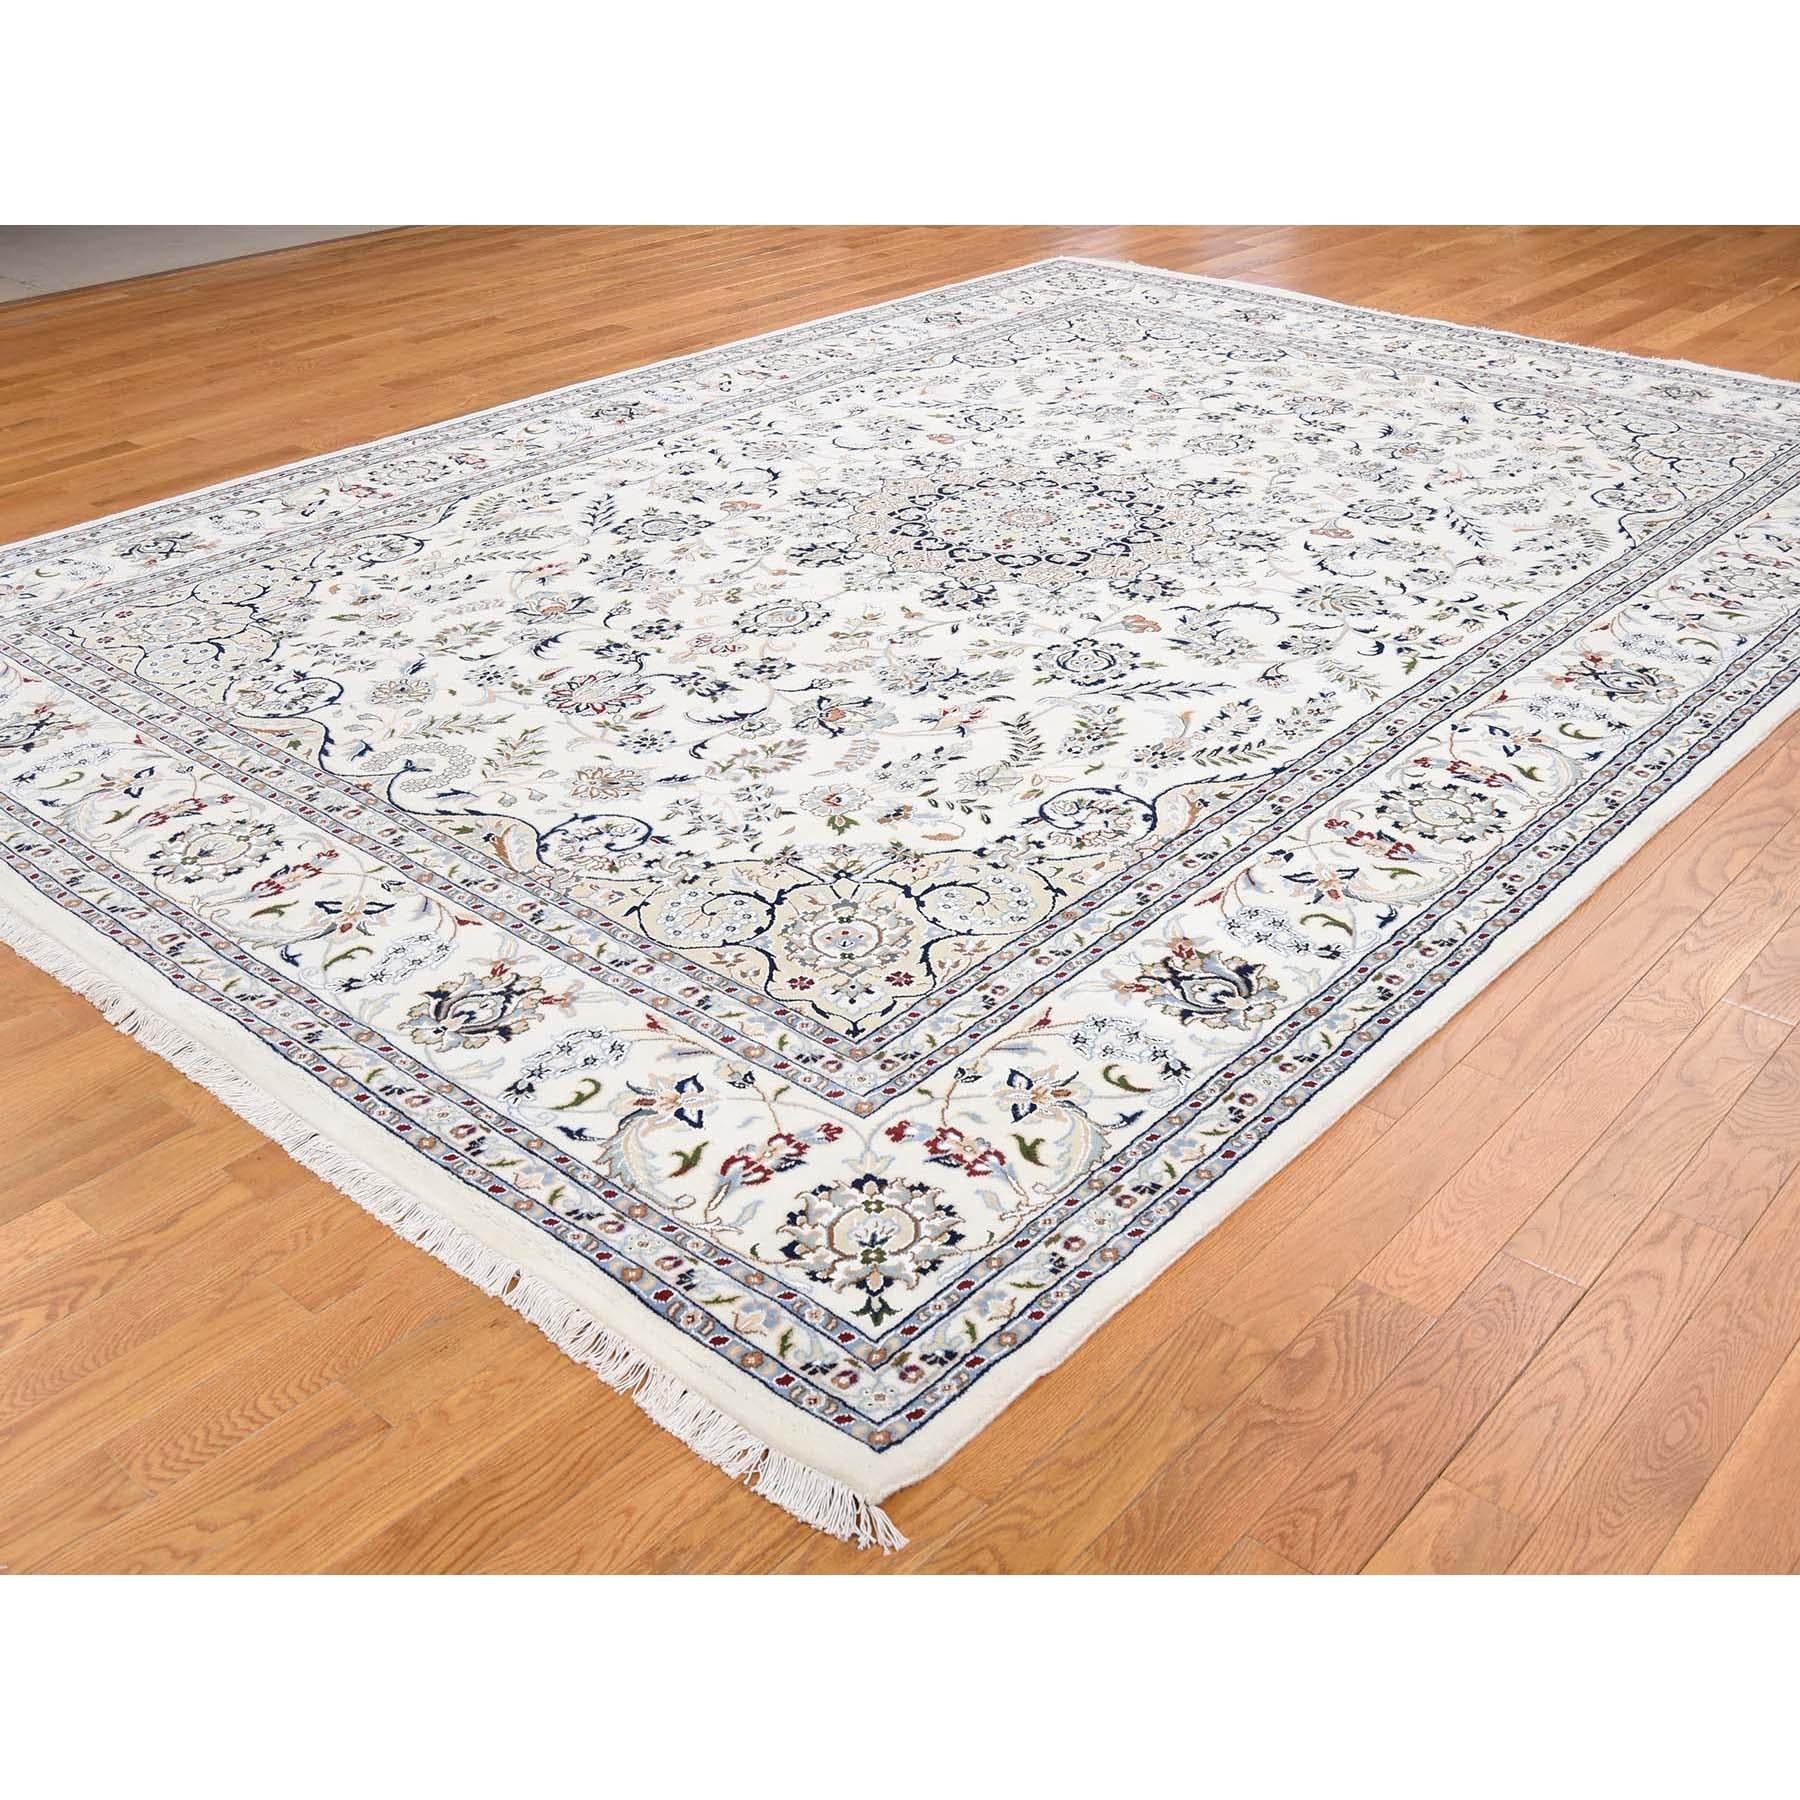 Afghan Wool and Silk 250 Kpsi Ivory Nain Hand Knotted Oriental Rug